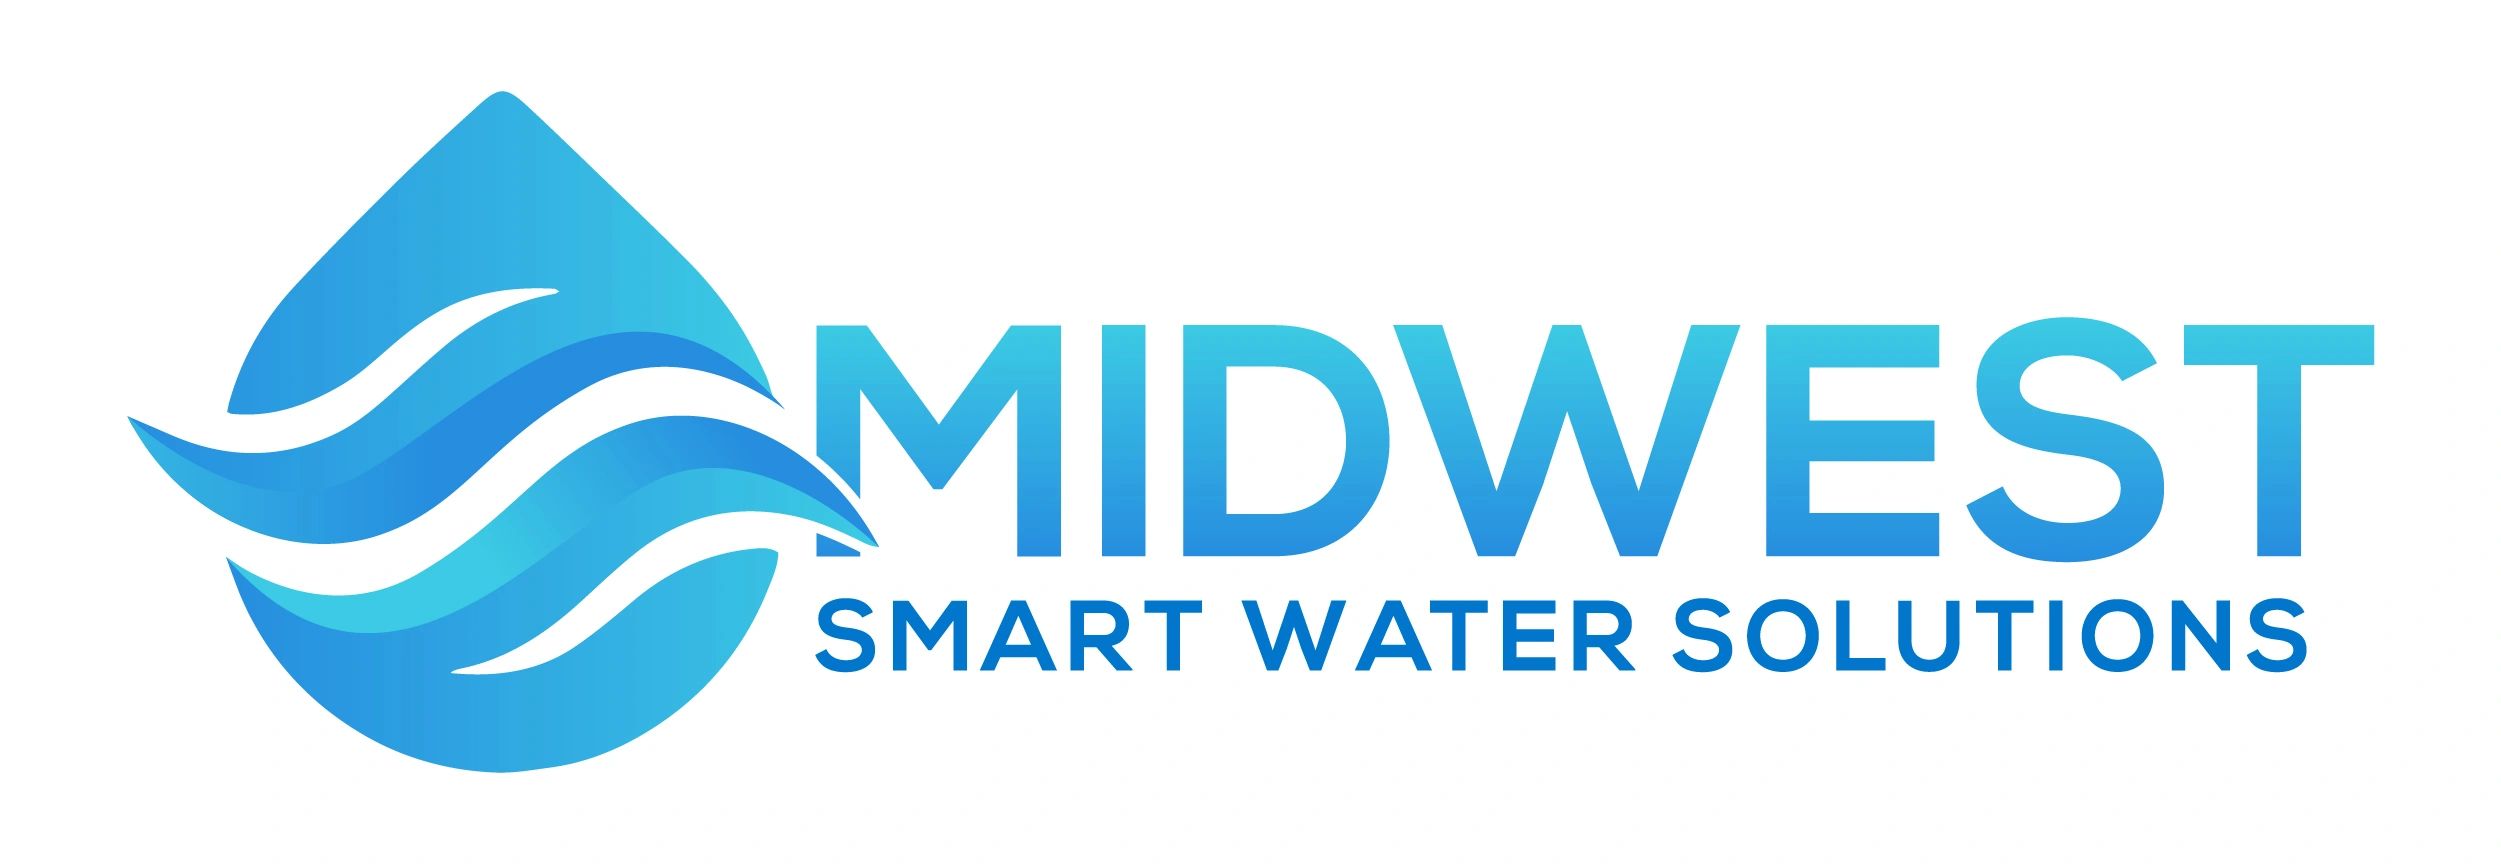 Midwest Smart Water Solutions